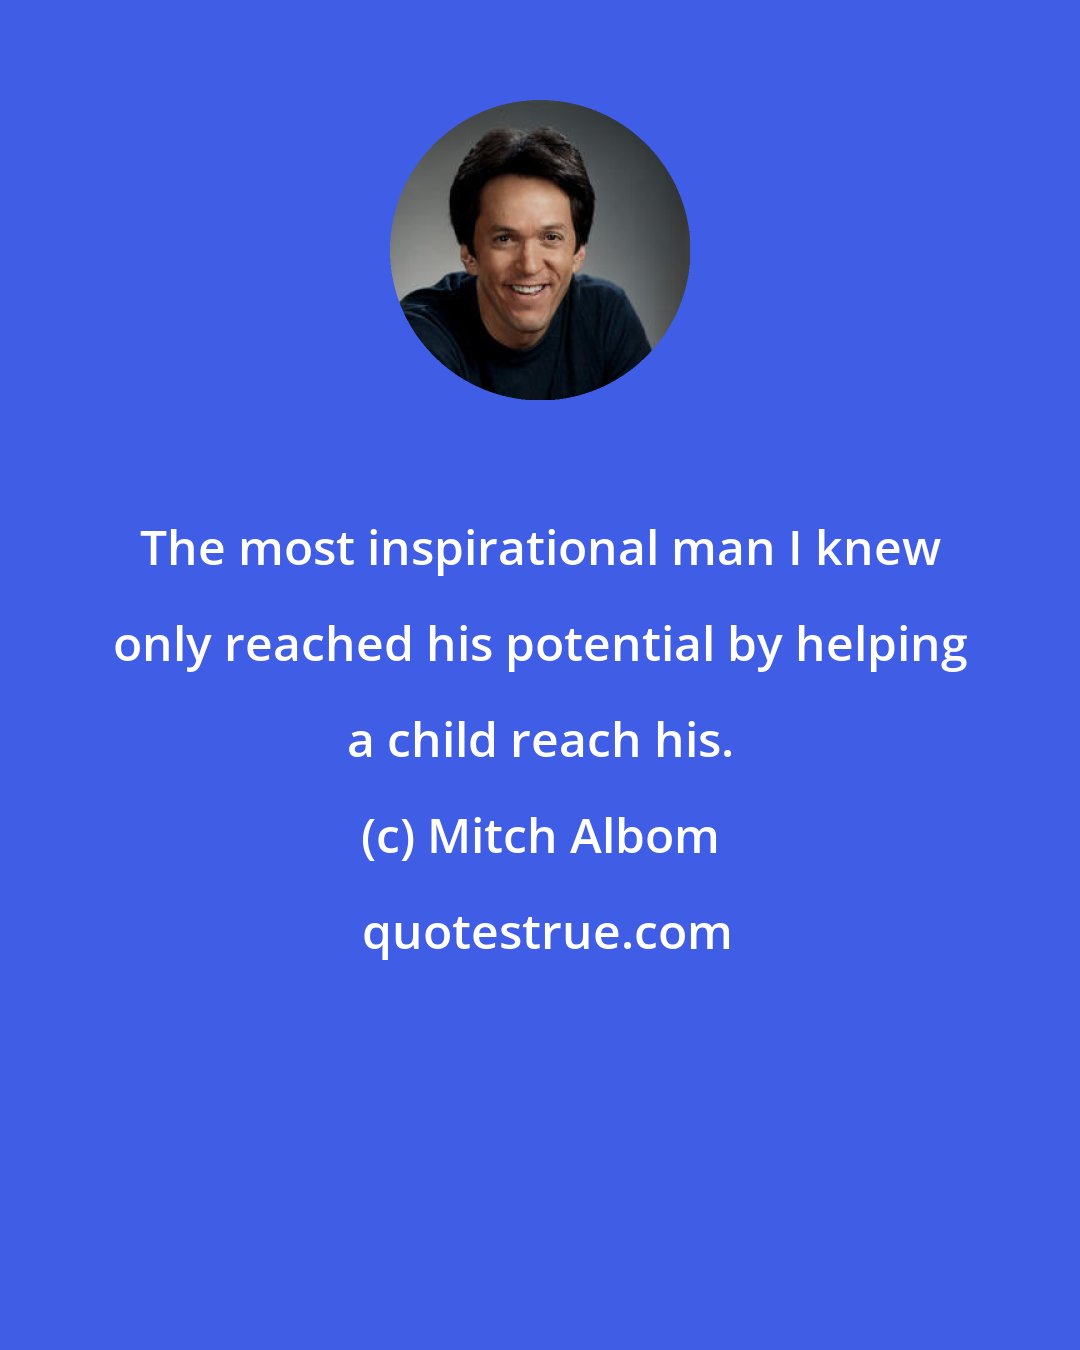 Mitch Albom: The most inspirational man I knew only reached his potential by helping a child reach his.